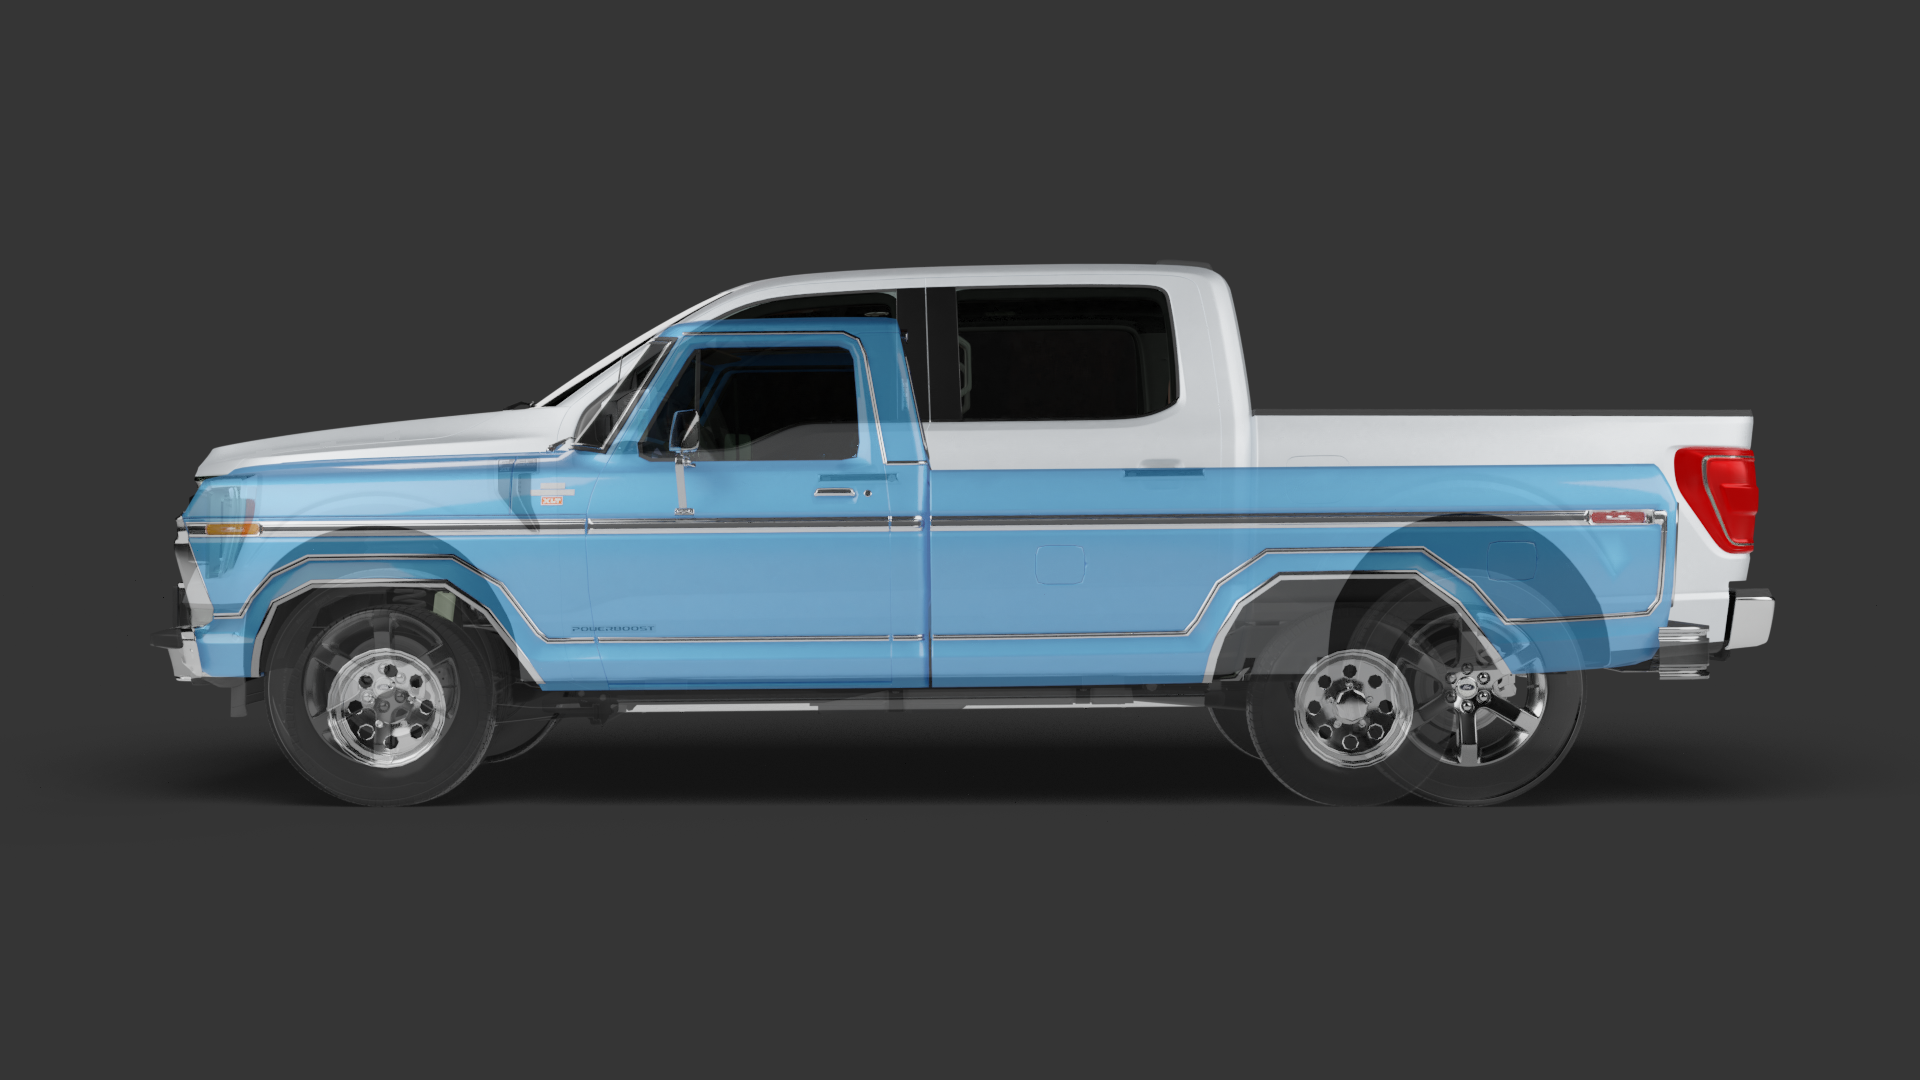  A 1970s-era Ford F-150 as compared to a modern version.